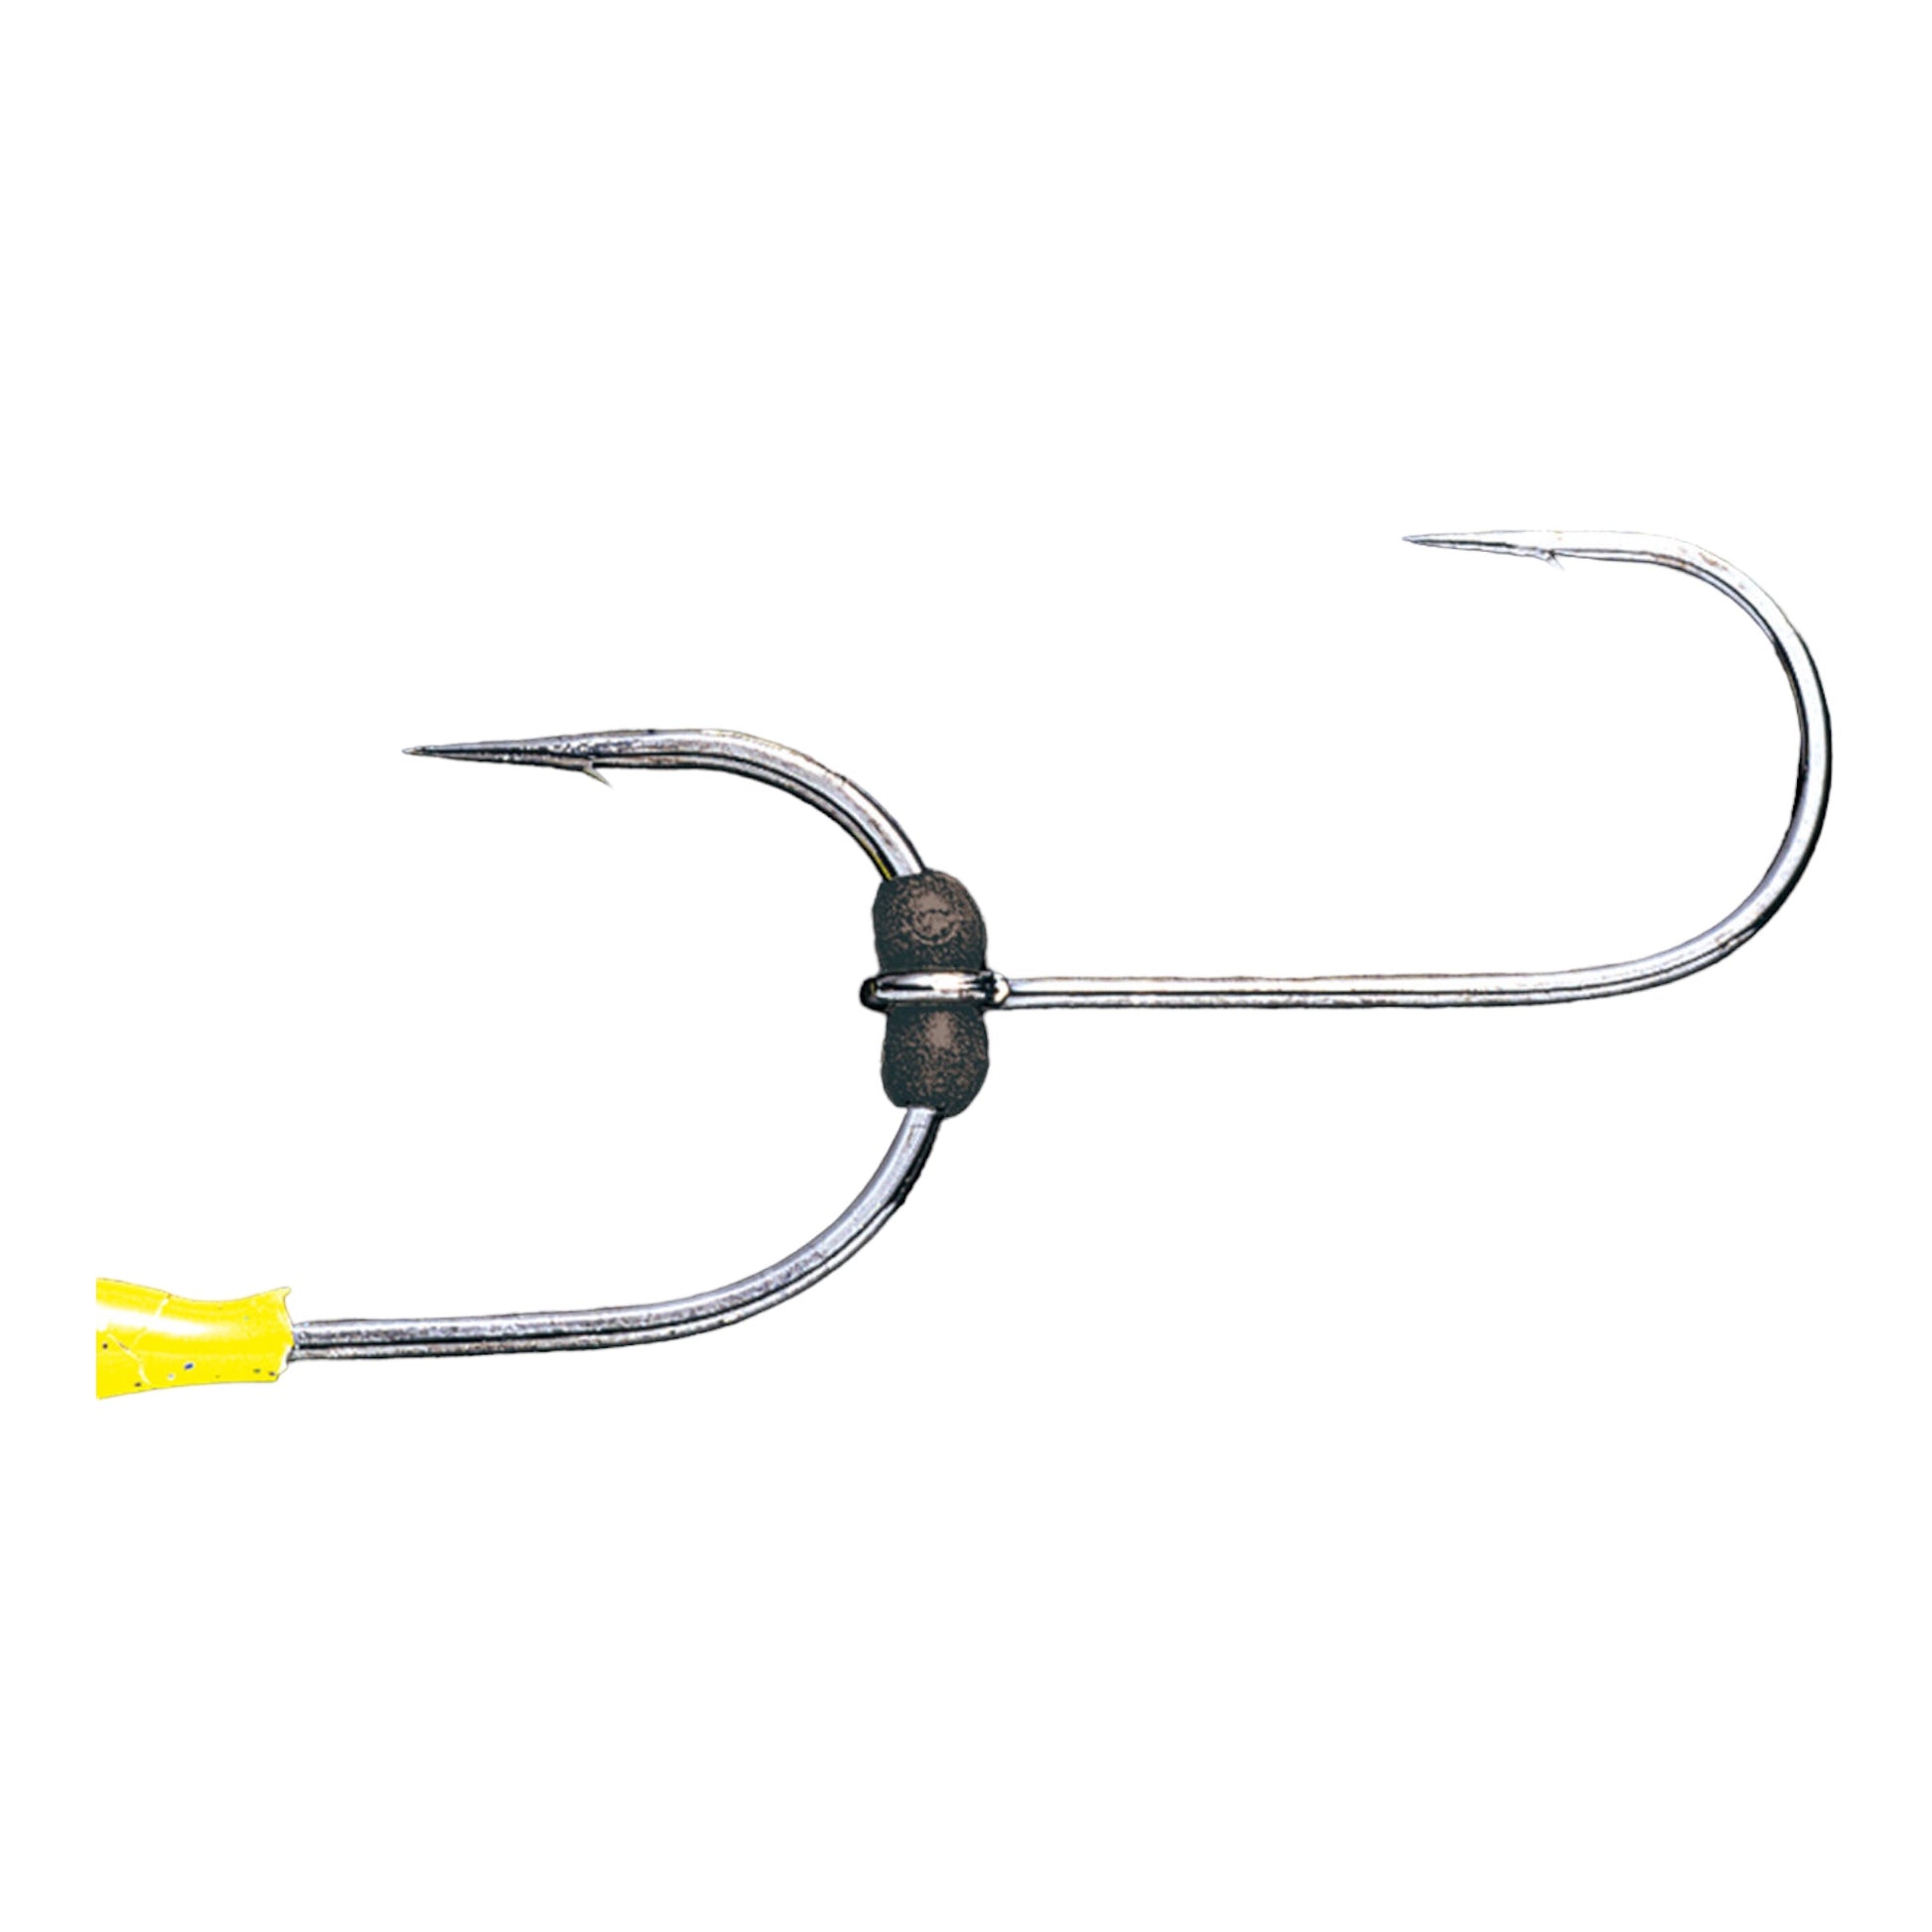 Decoy TH-I Chaser Spinnerbait / Buzzbait Trailer Hook – Three Rivers Tackle